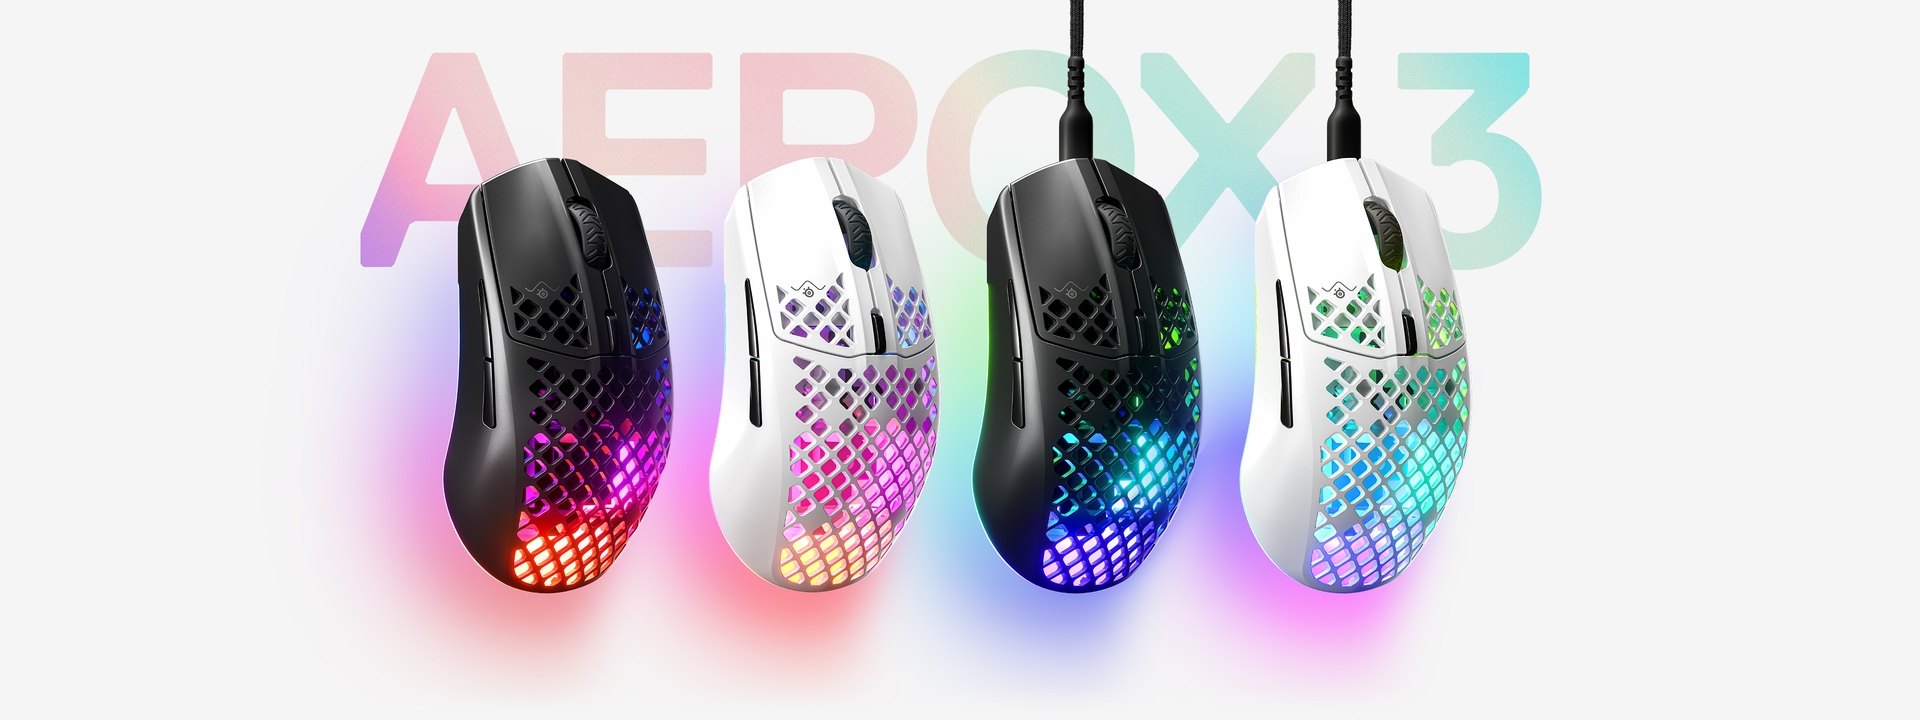 Lineup of all the Aerox 3 mice, with RGB illuminating through the holes of the mice. Text behind the mice reads, "Aerox 3".